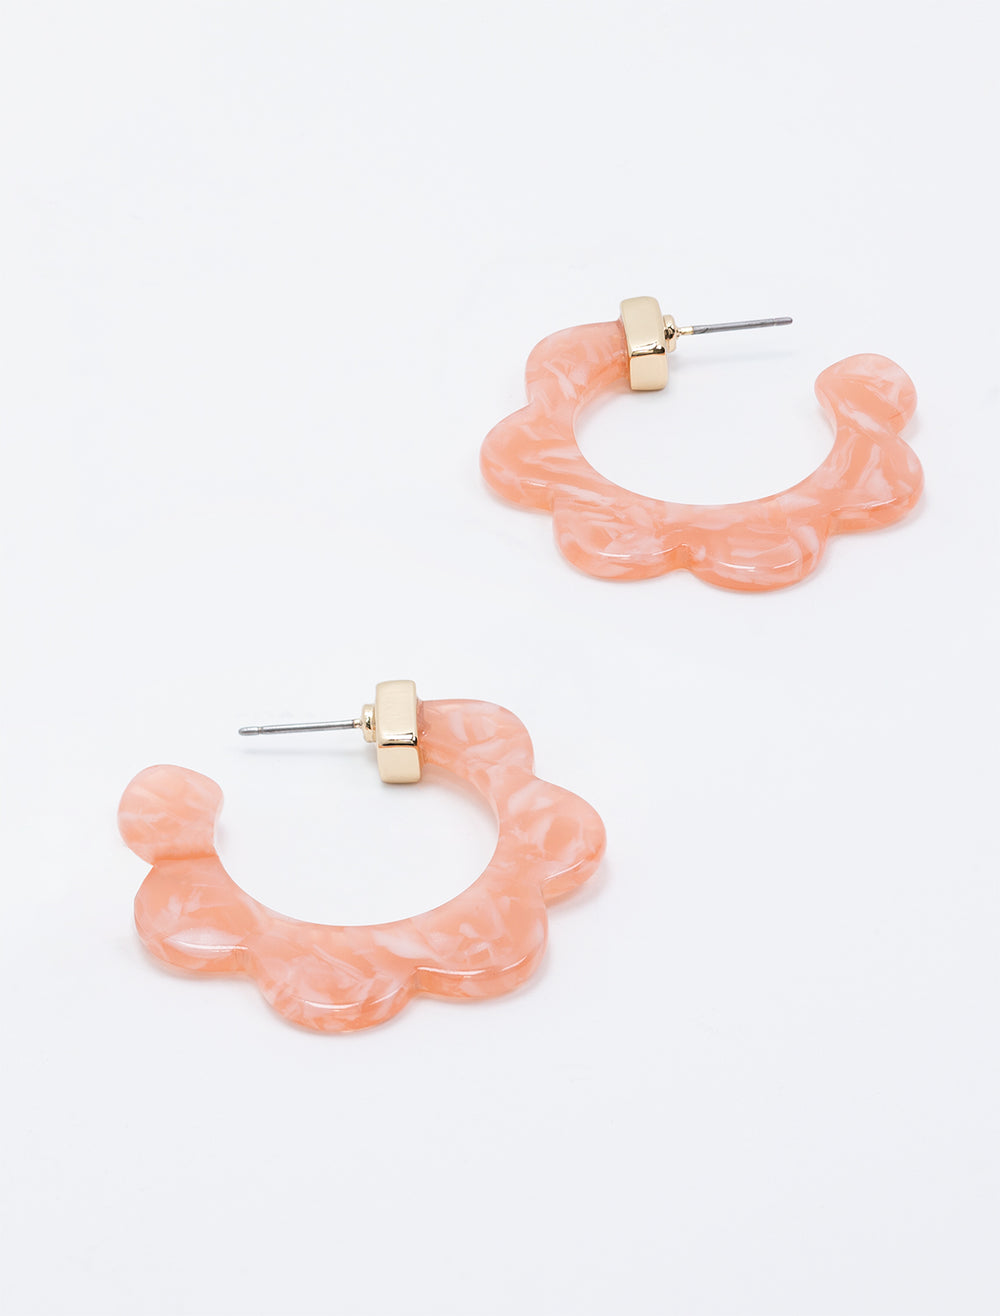 Laydown of West Eleventh's pink scallop hoops.